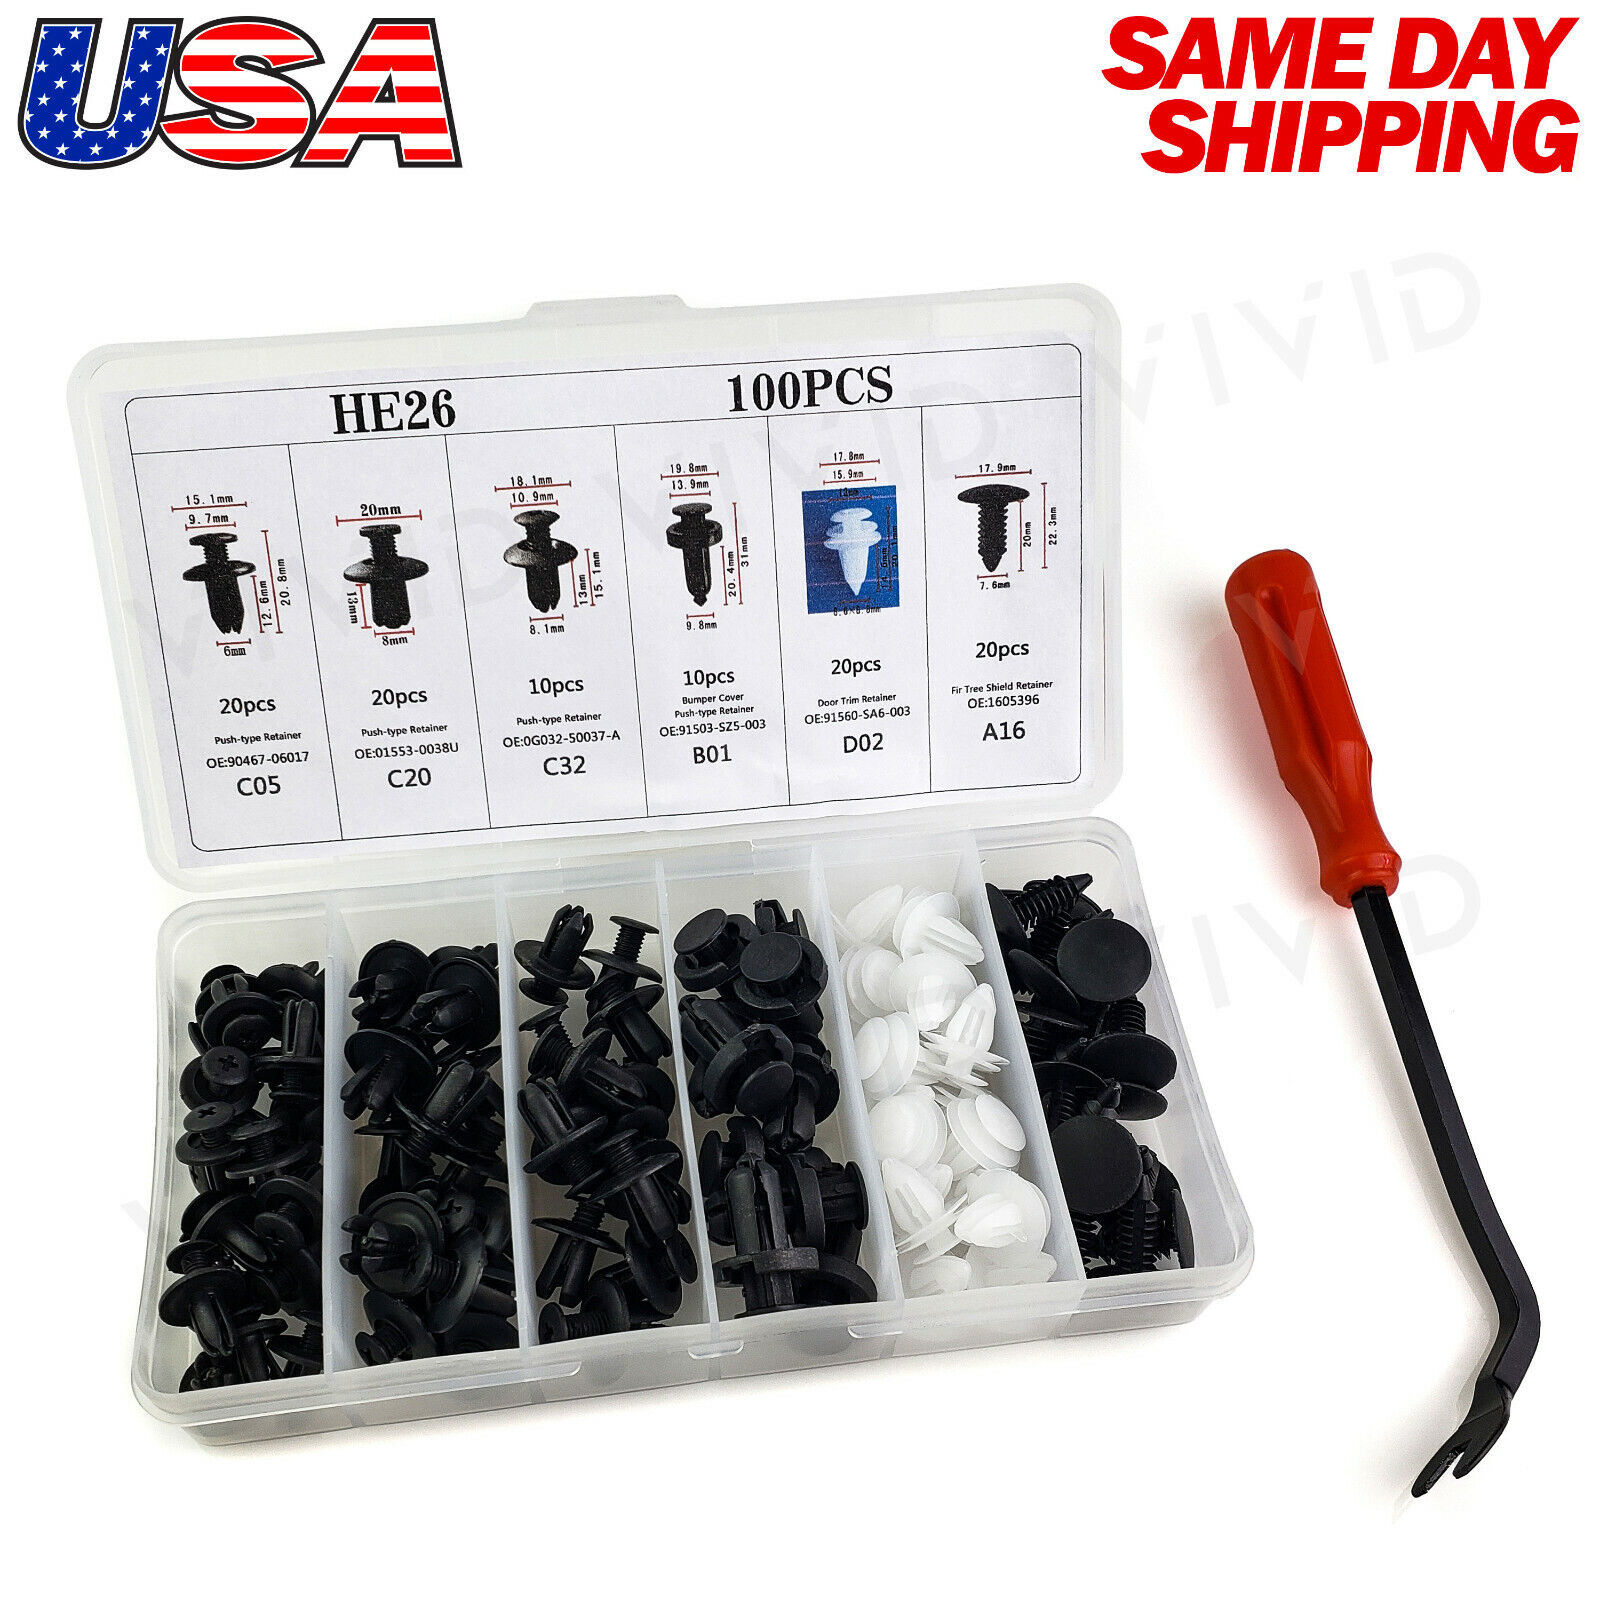 Primary image for 100pc Set Plastic Rivets Fastener Fender Bumper Push Clips w/ Tool for Ford SUVs